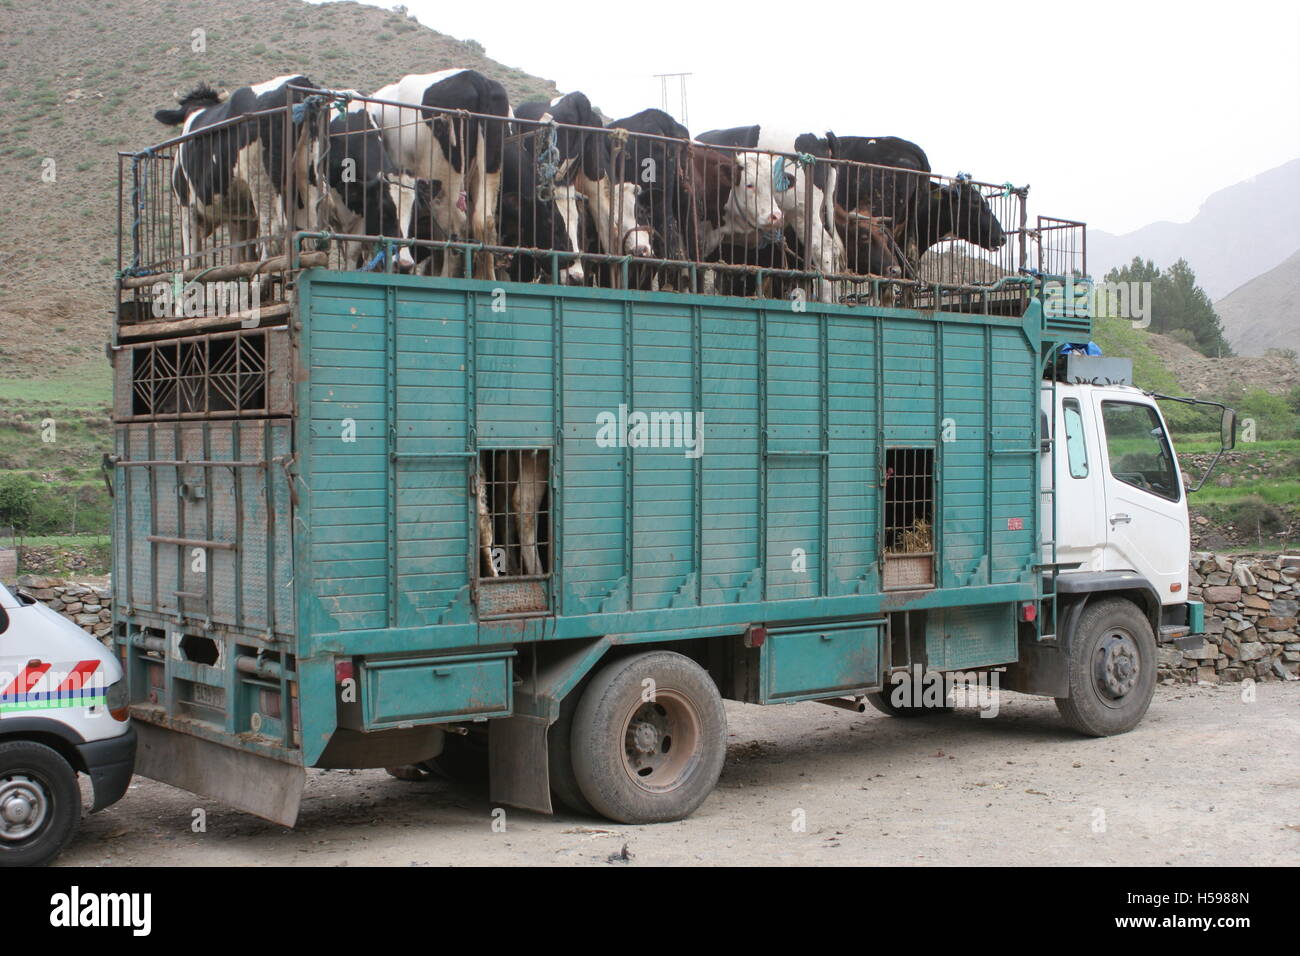 Cattle are transported both inside and on the roof of an aging truck in Southern Morocco, Africa Stock Photo